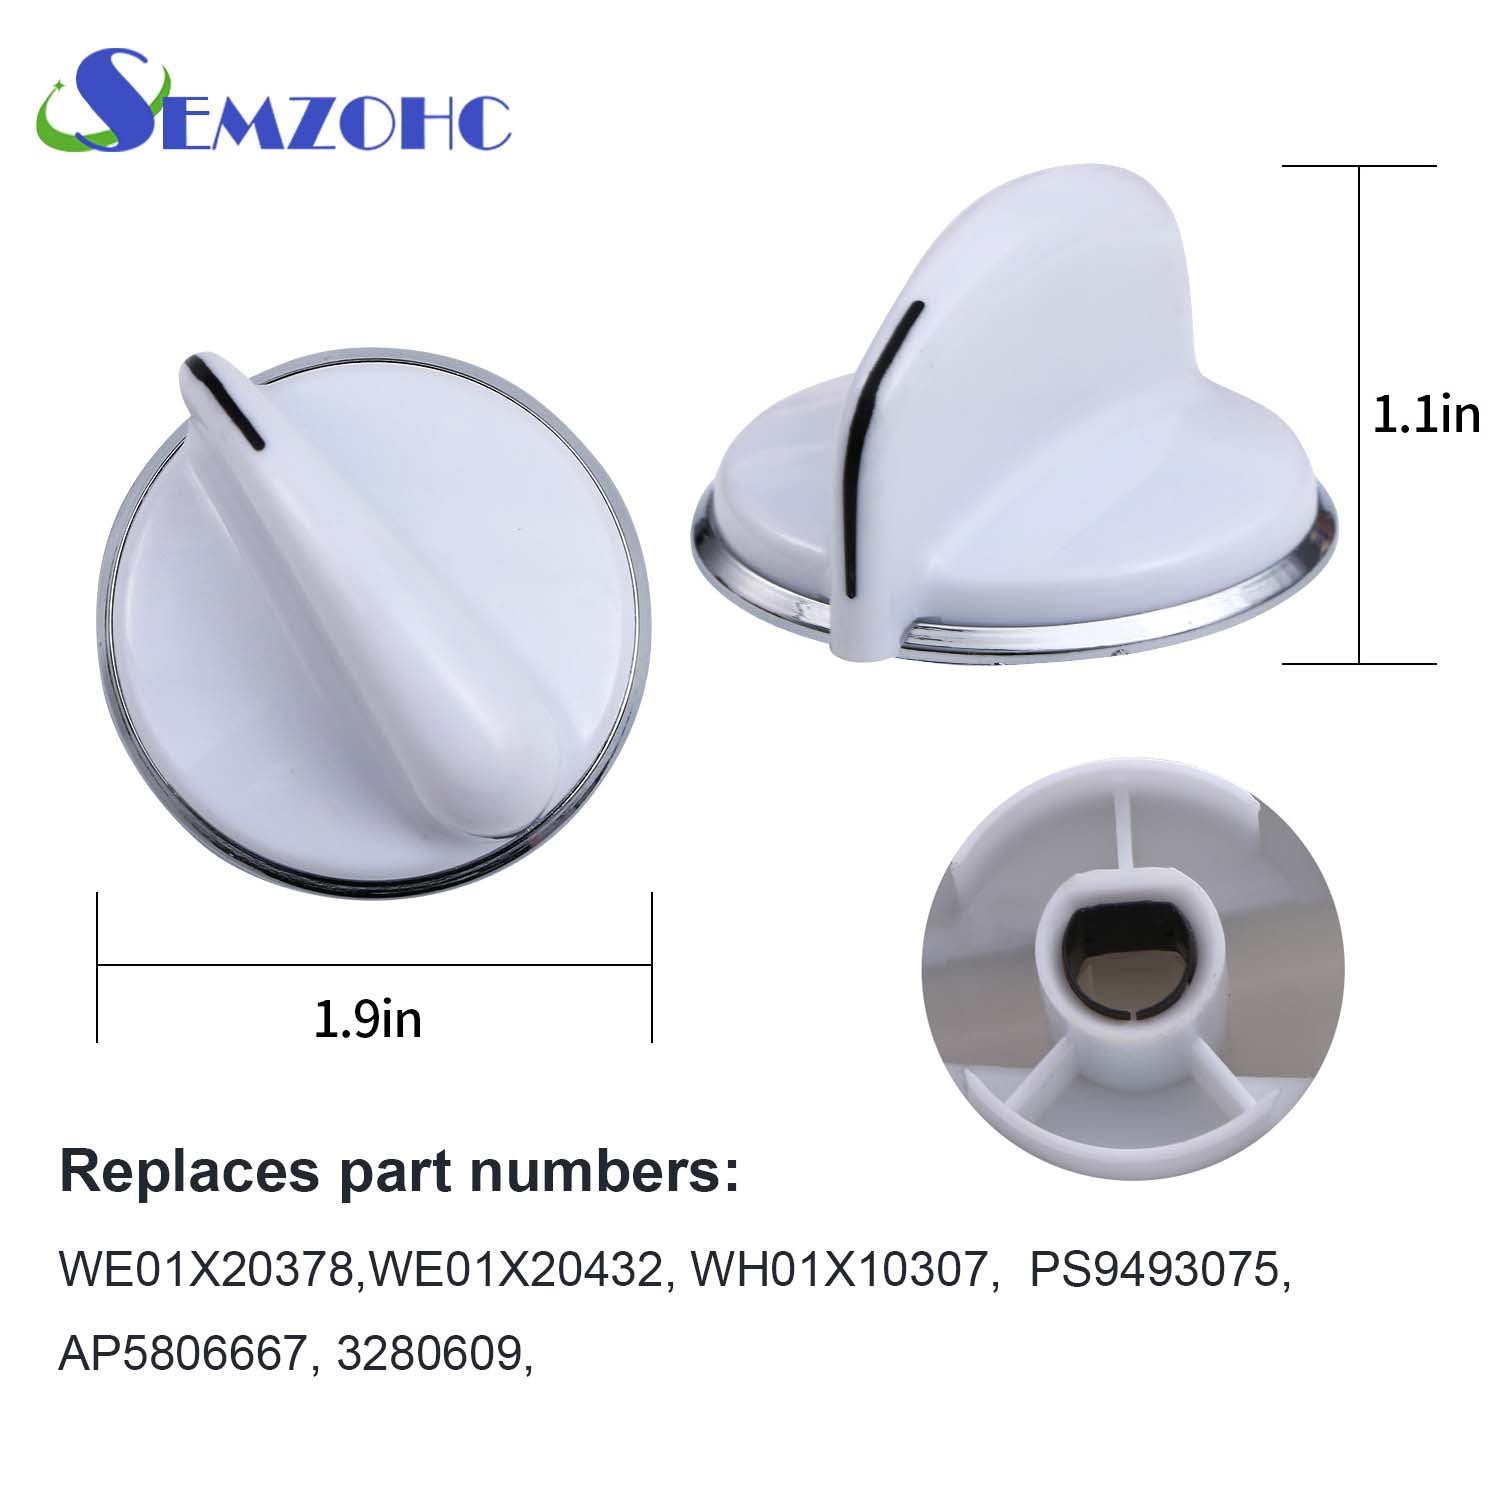 Semzohc 2 Pack WE01X20378 Dryer Control Knobs Replacement Compatible with General Electric Dryers/Washer - Replaces WH01X10460, WE01X20432, WH01X10307, AP5806667, 3280609, PS9493075